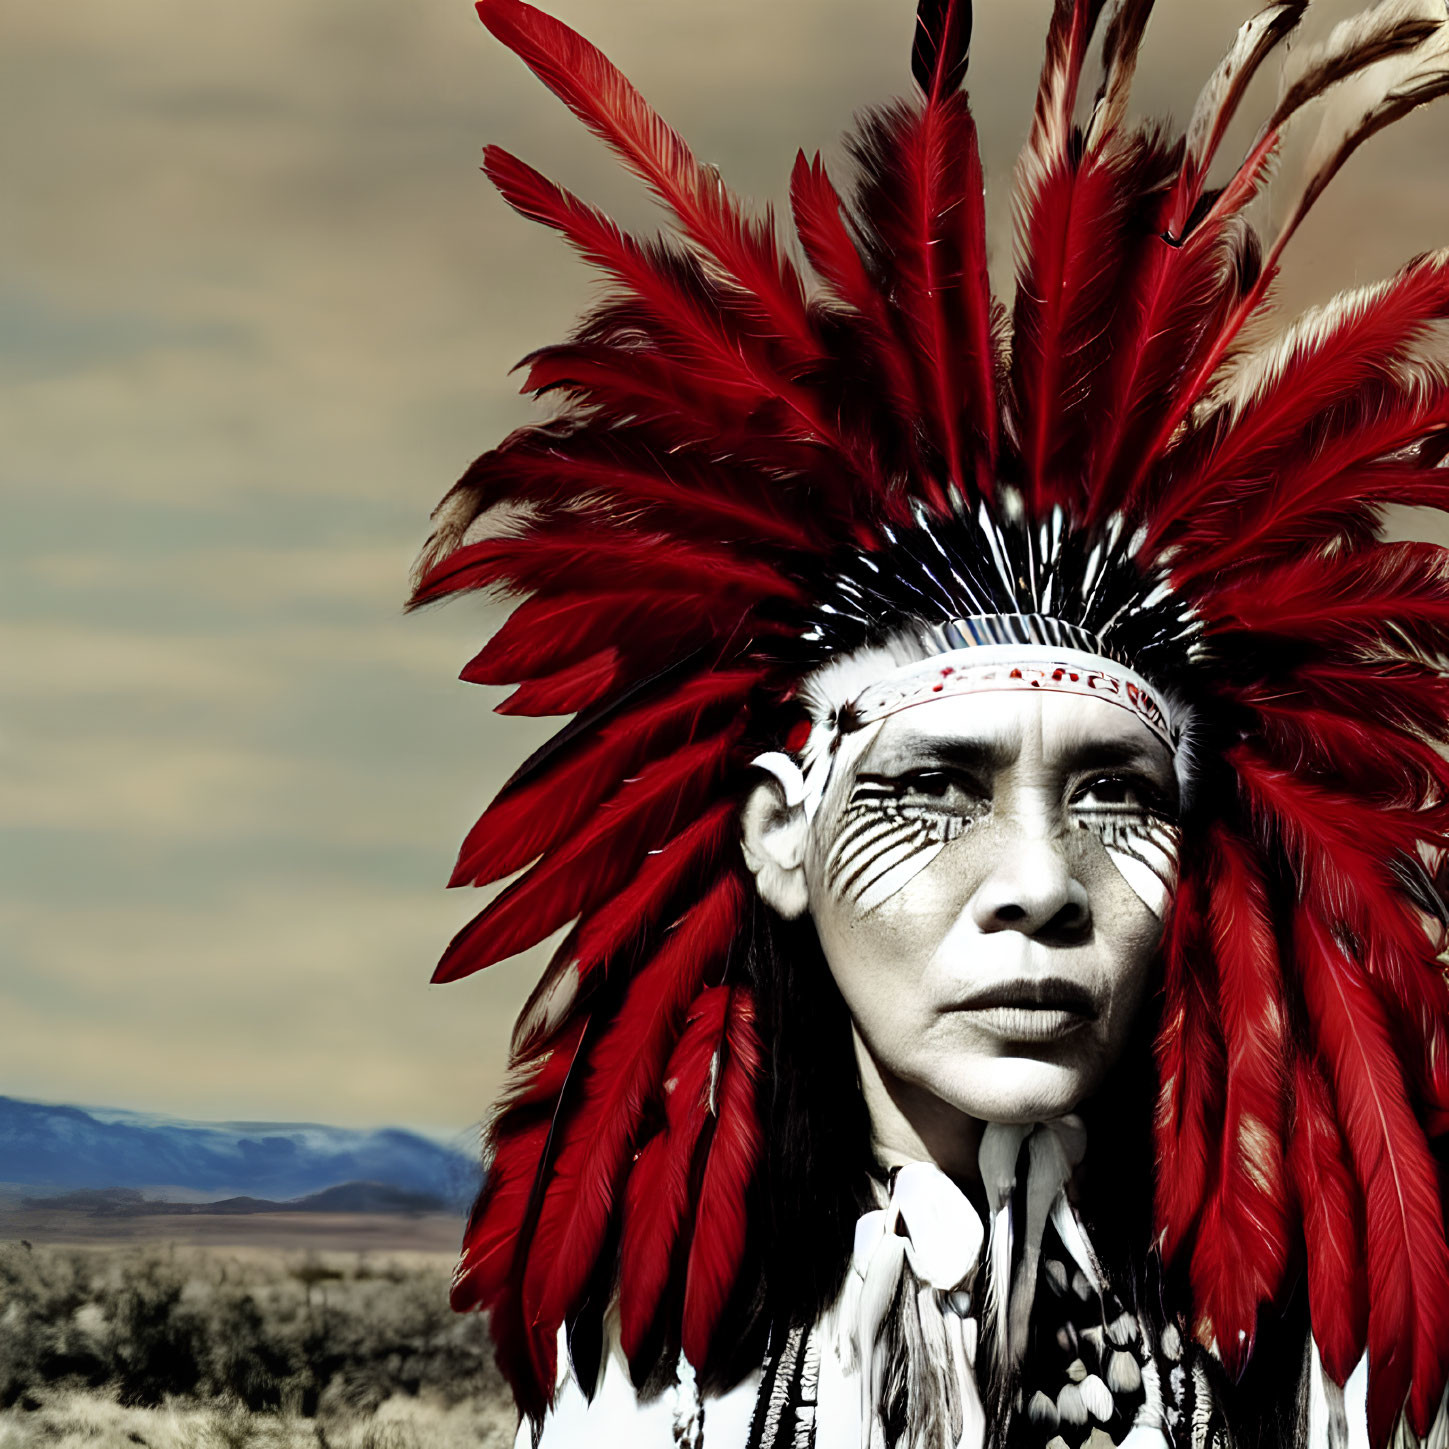 Person in Native American headdress with red feathers, painted face, gazing into distance.